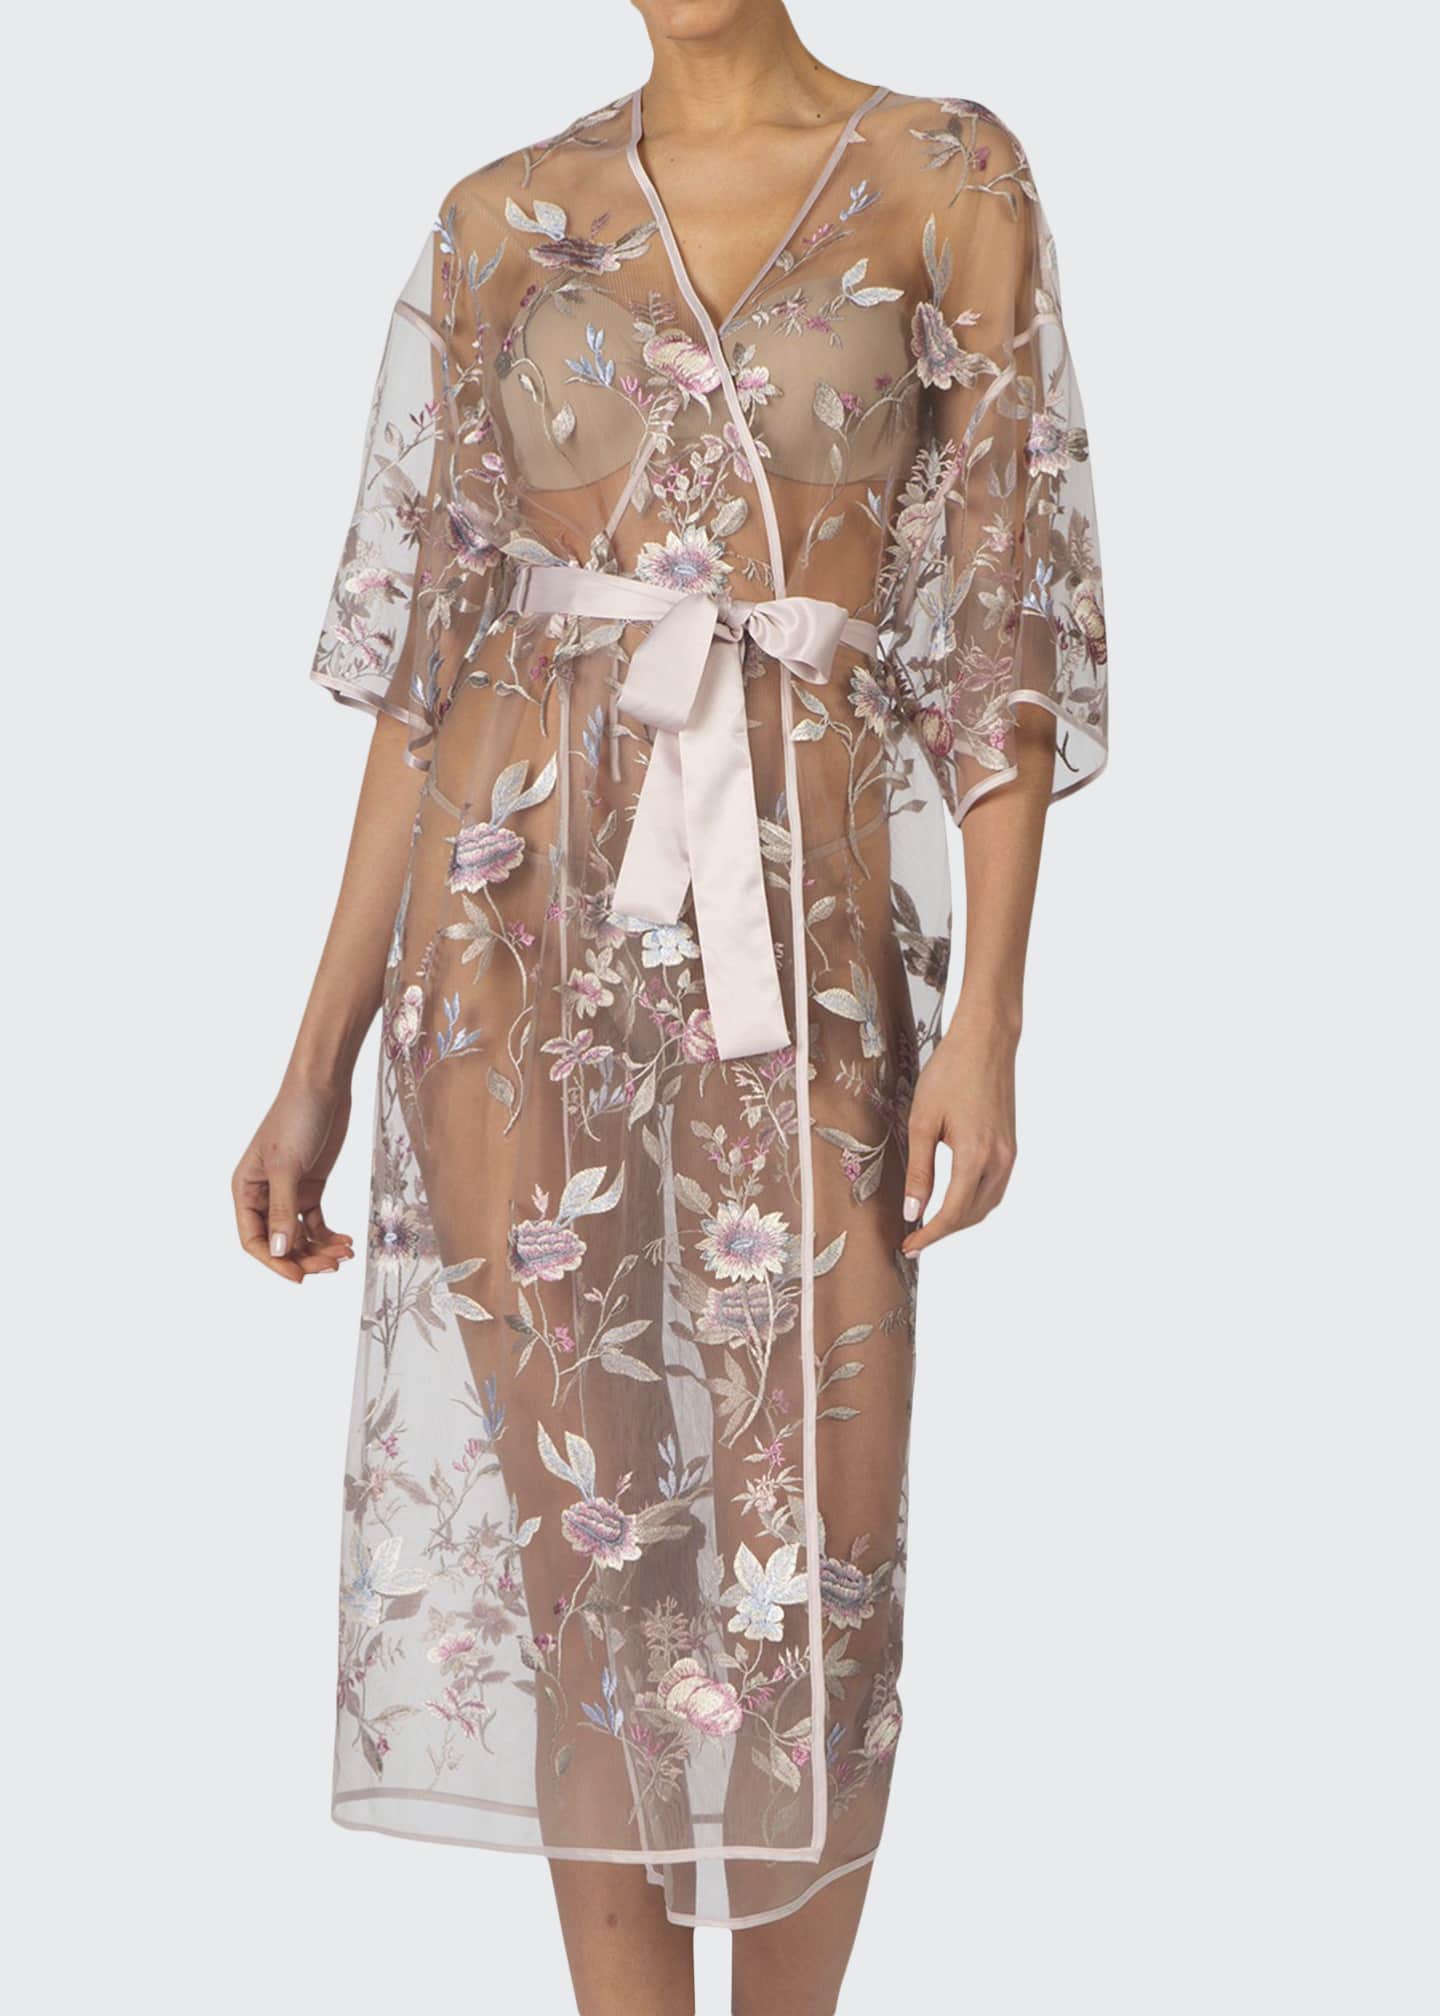 Rya Collection Stunning Floral Embroidered Sheer Robe Bergdorf Goodman 4977